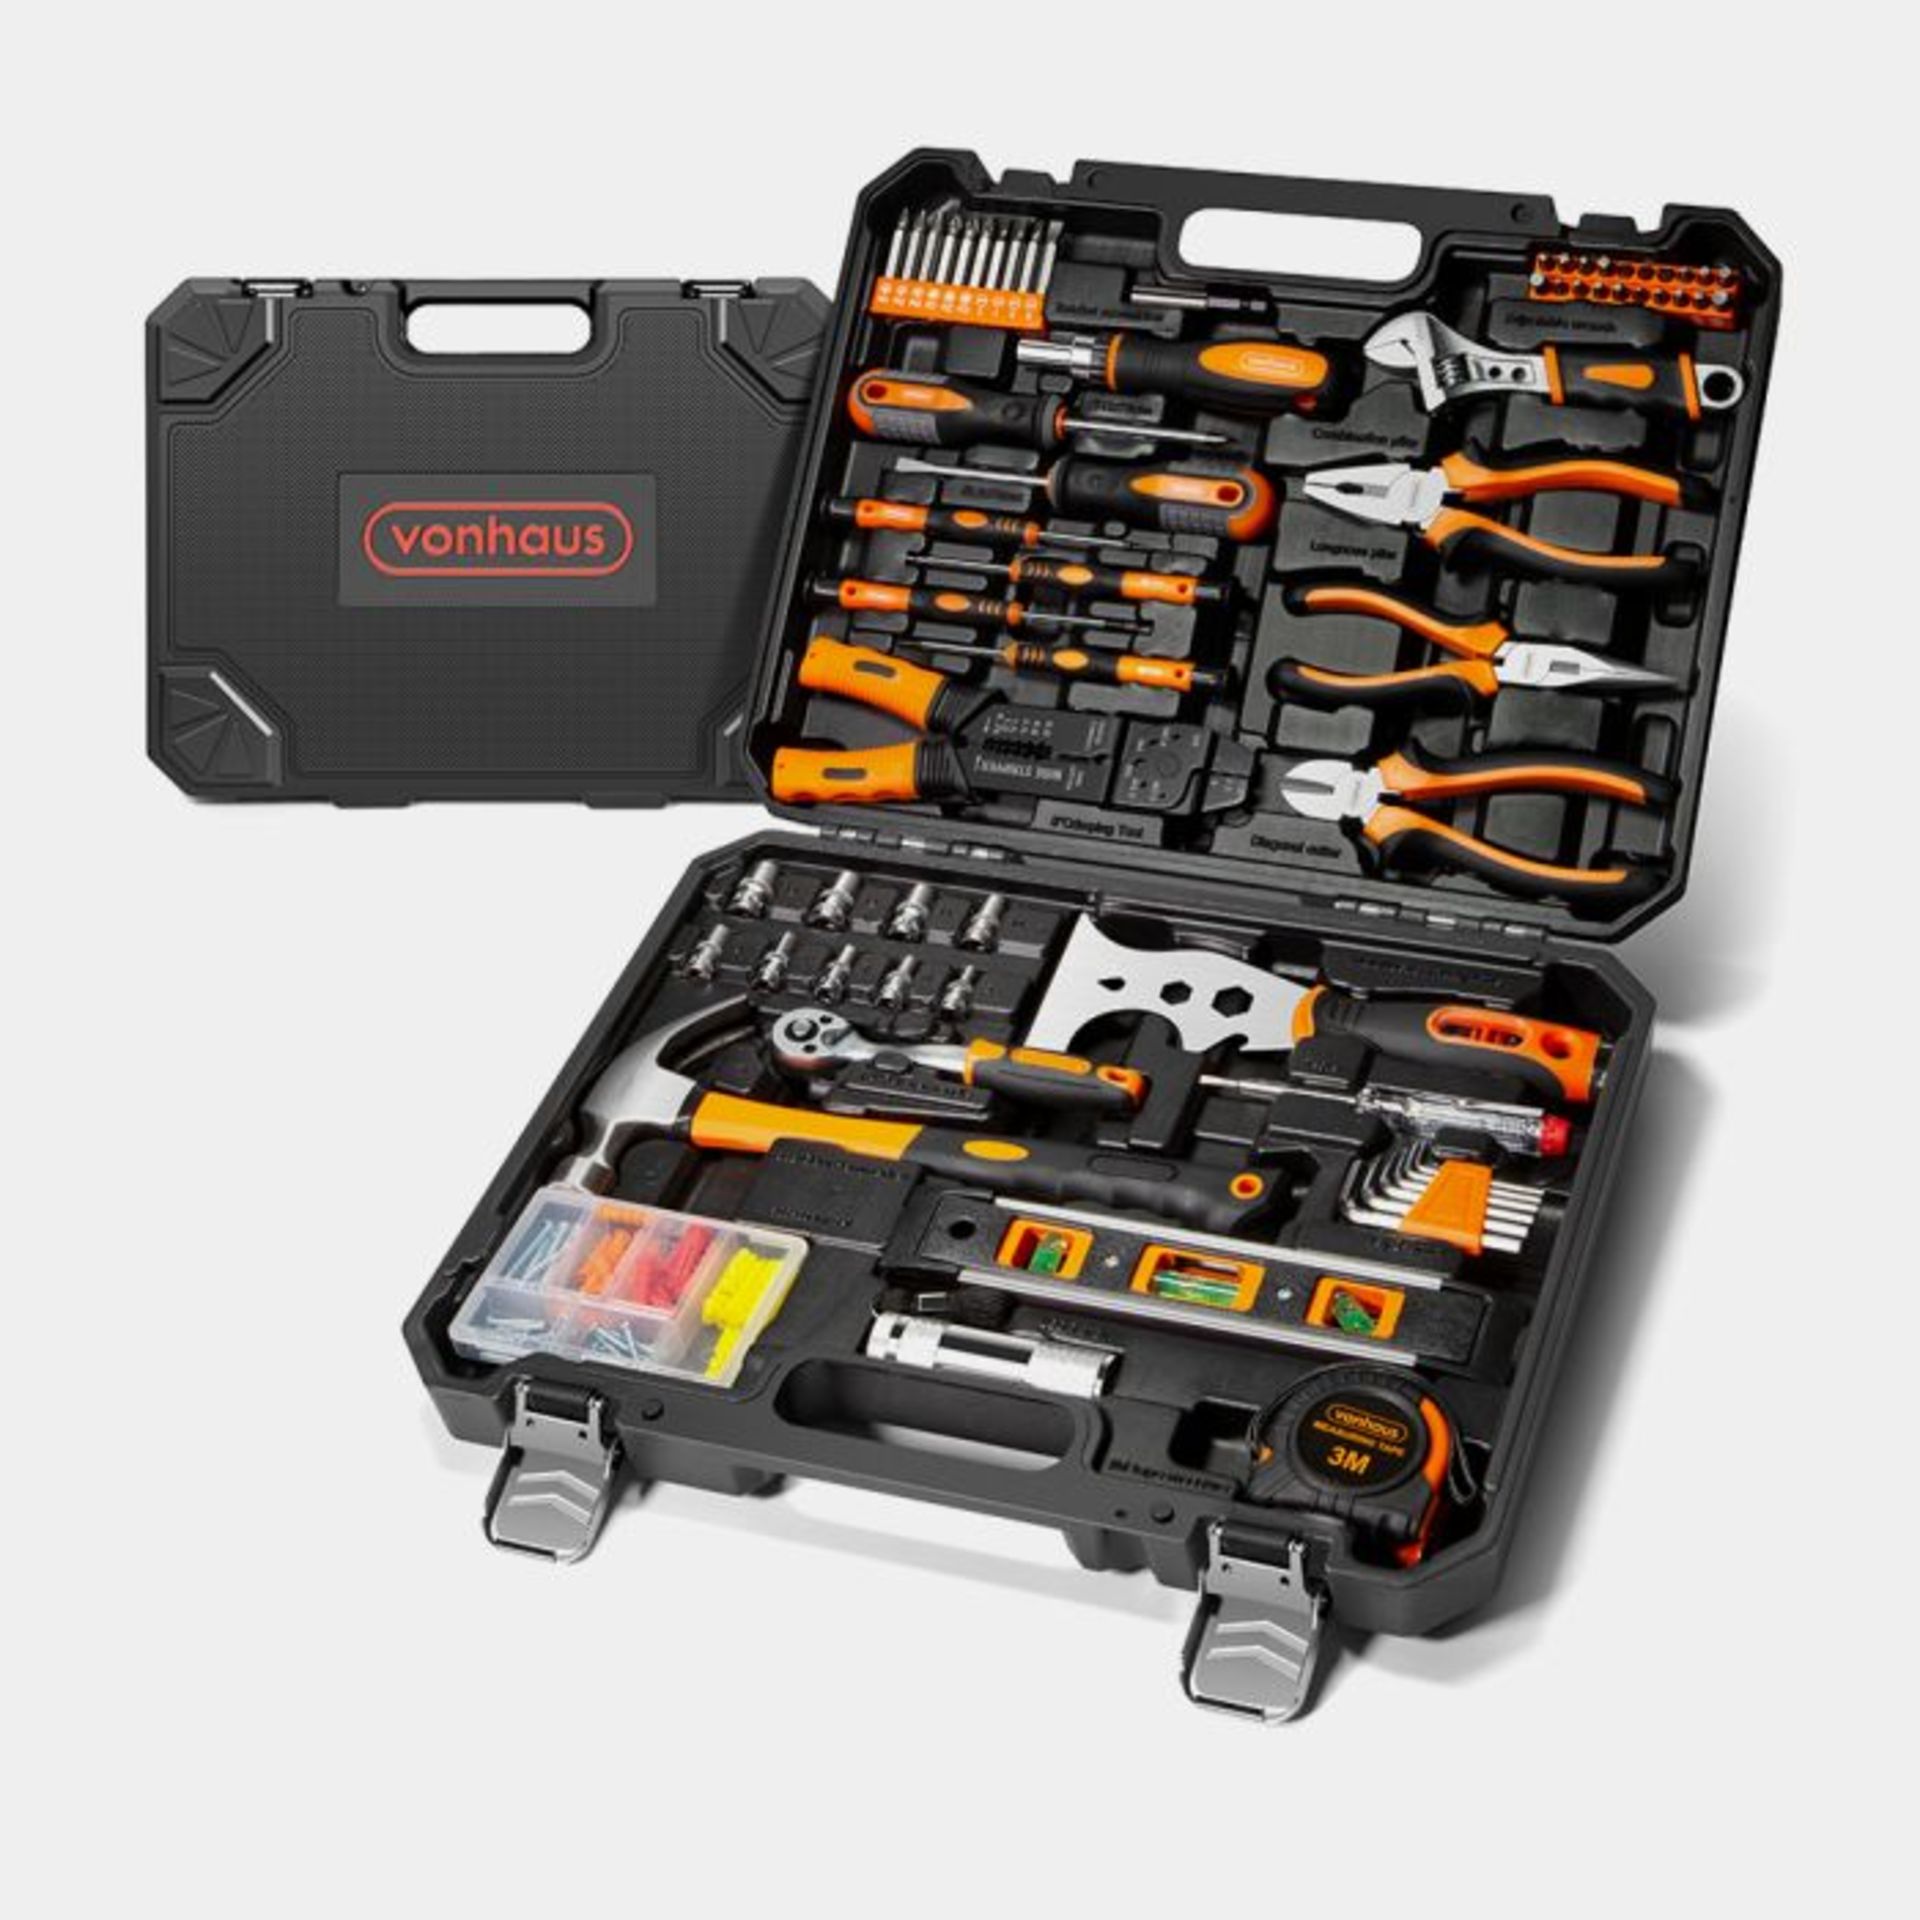 120Pc Ultimate Hand Tool Set. - ER51. Carefully organised, each tool has its specific place within a